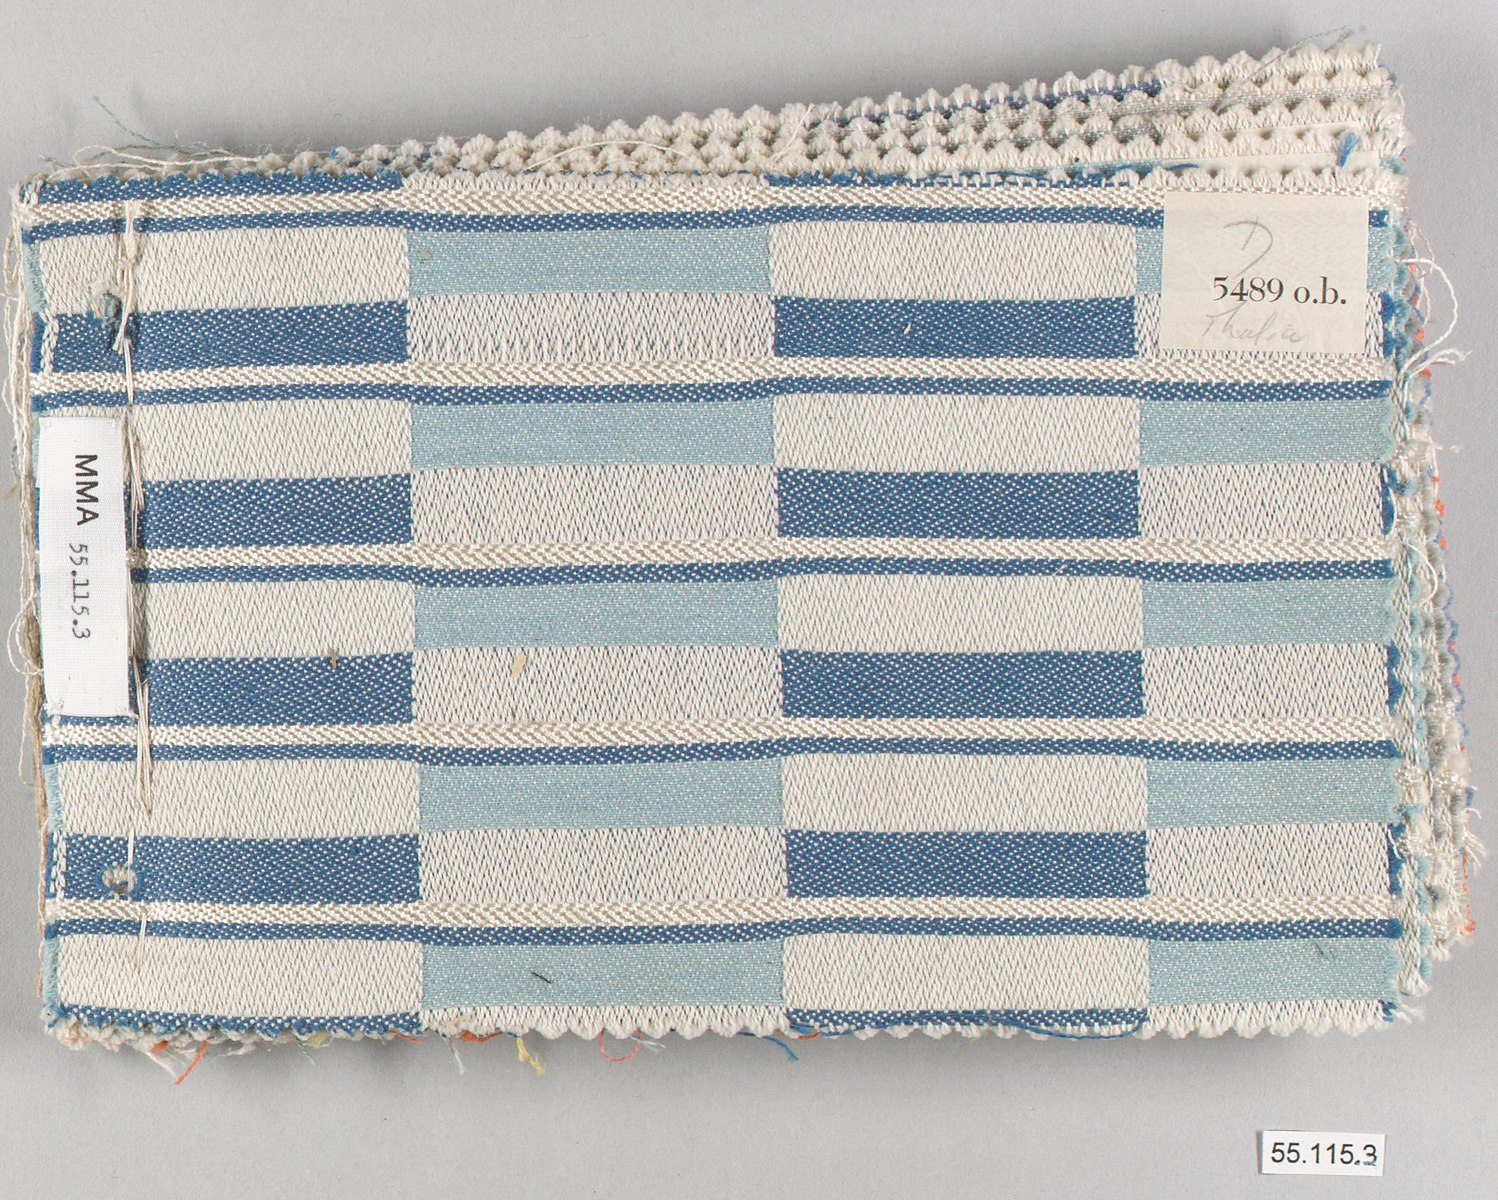 Blue and white woven fabric